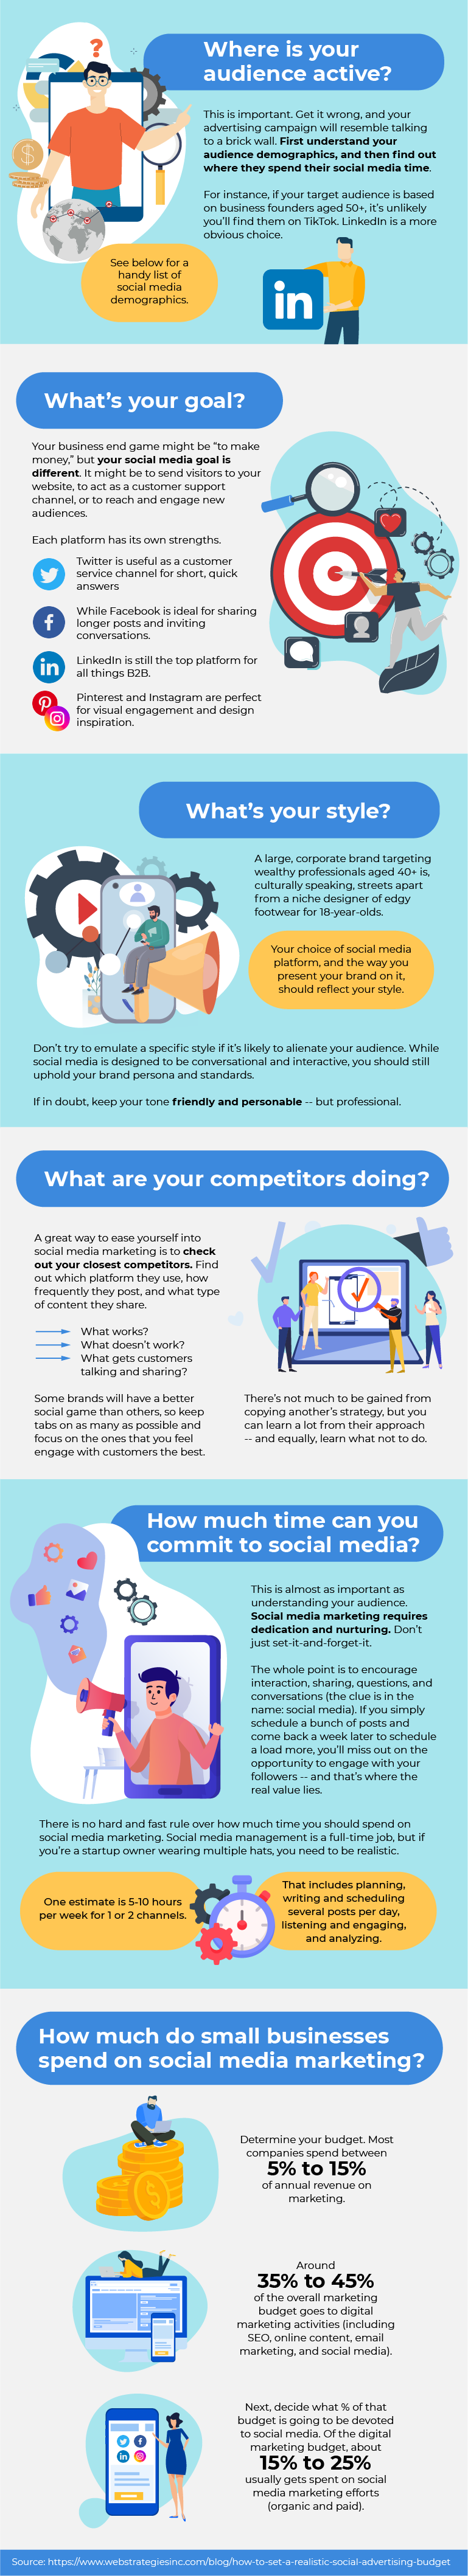 13-Infographic social media marketing for small business